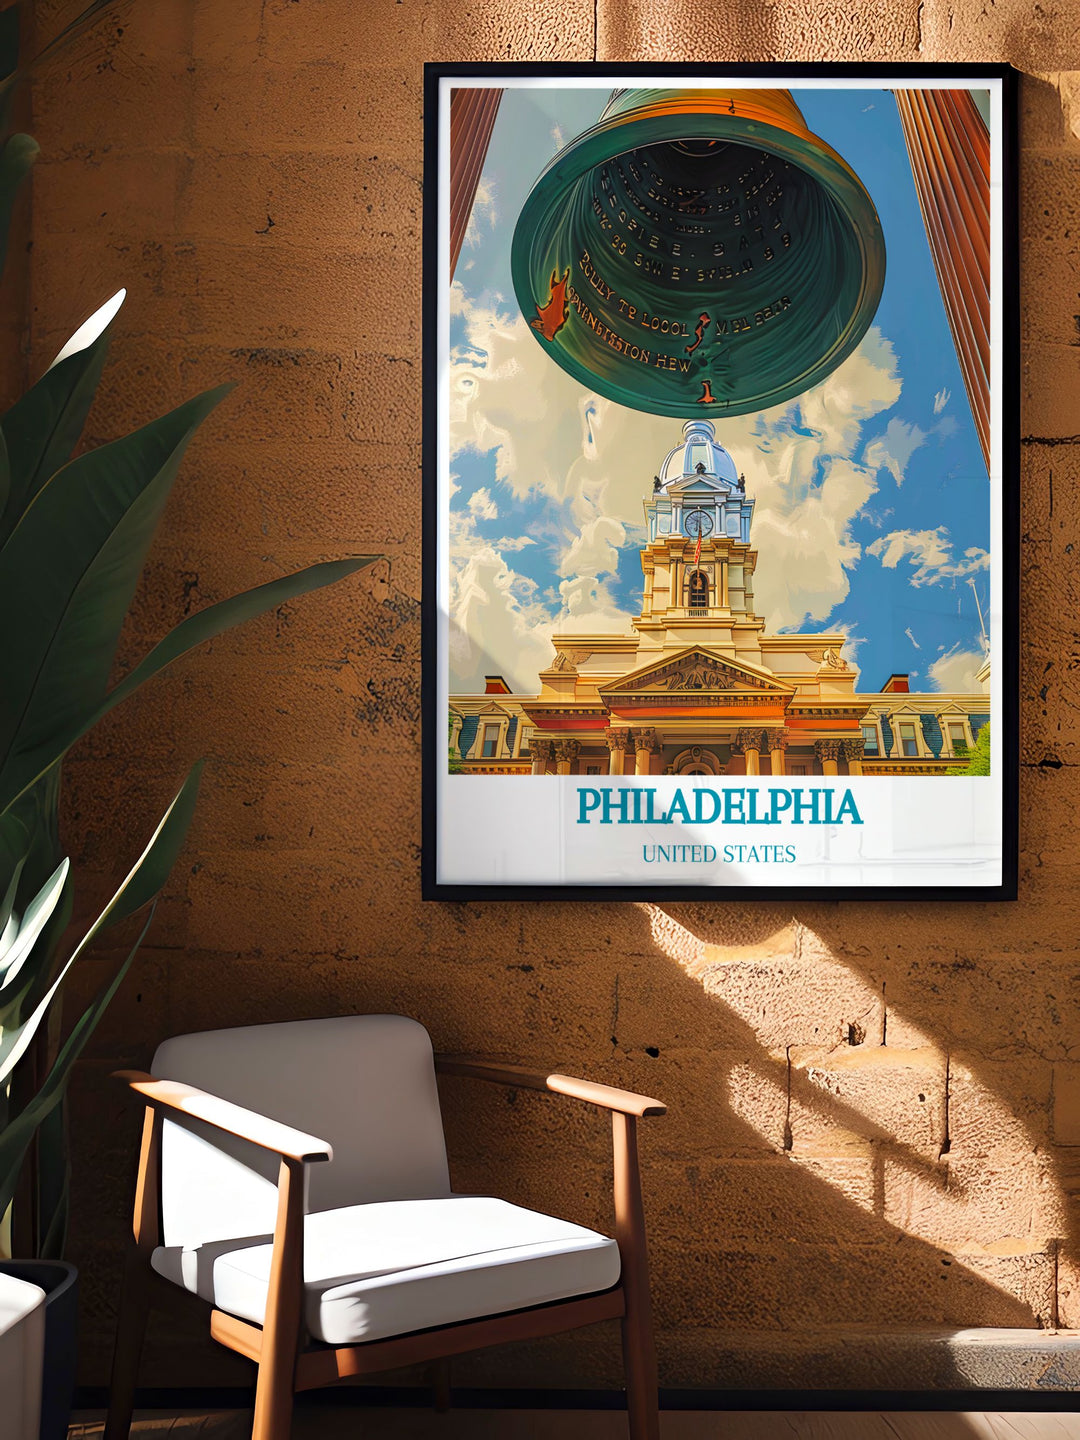 Immerse yourself in the history of American independence with this travel poster of the Liberty Bell, capturing the spirit of liberty and justice.